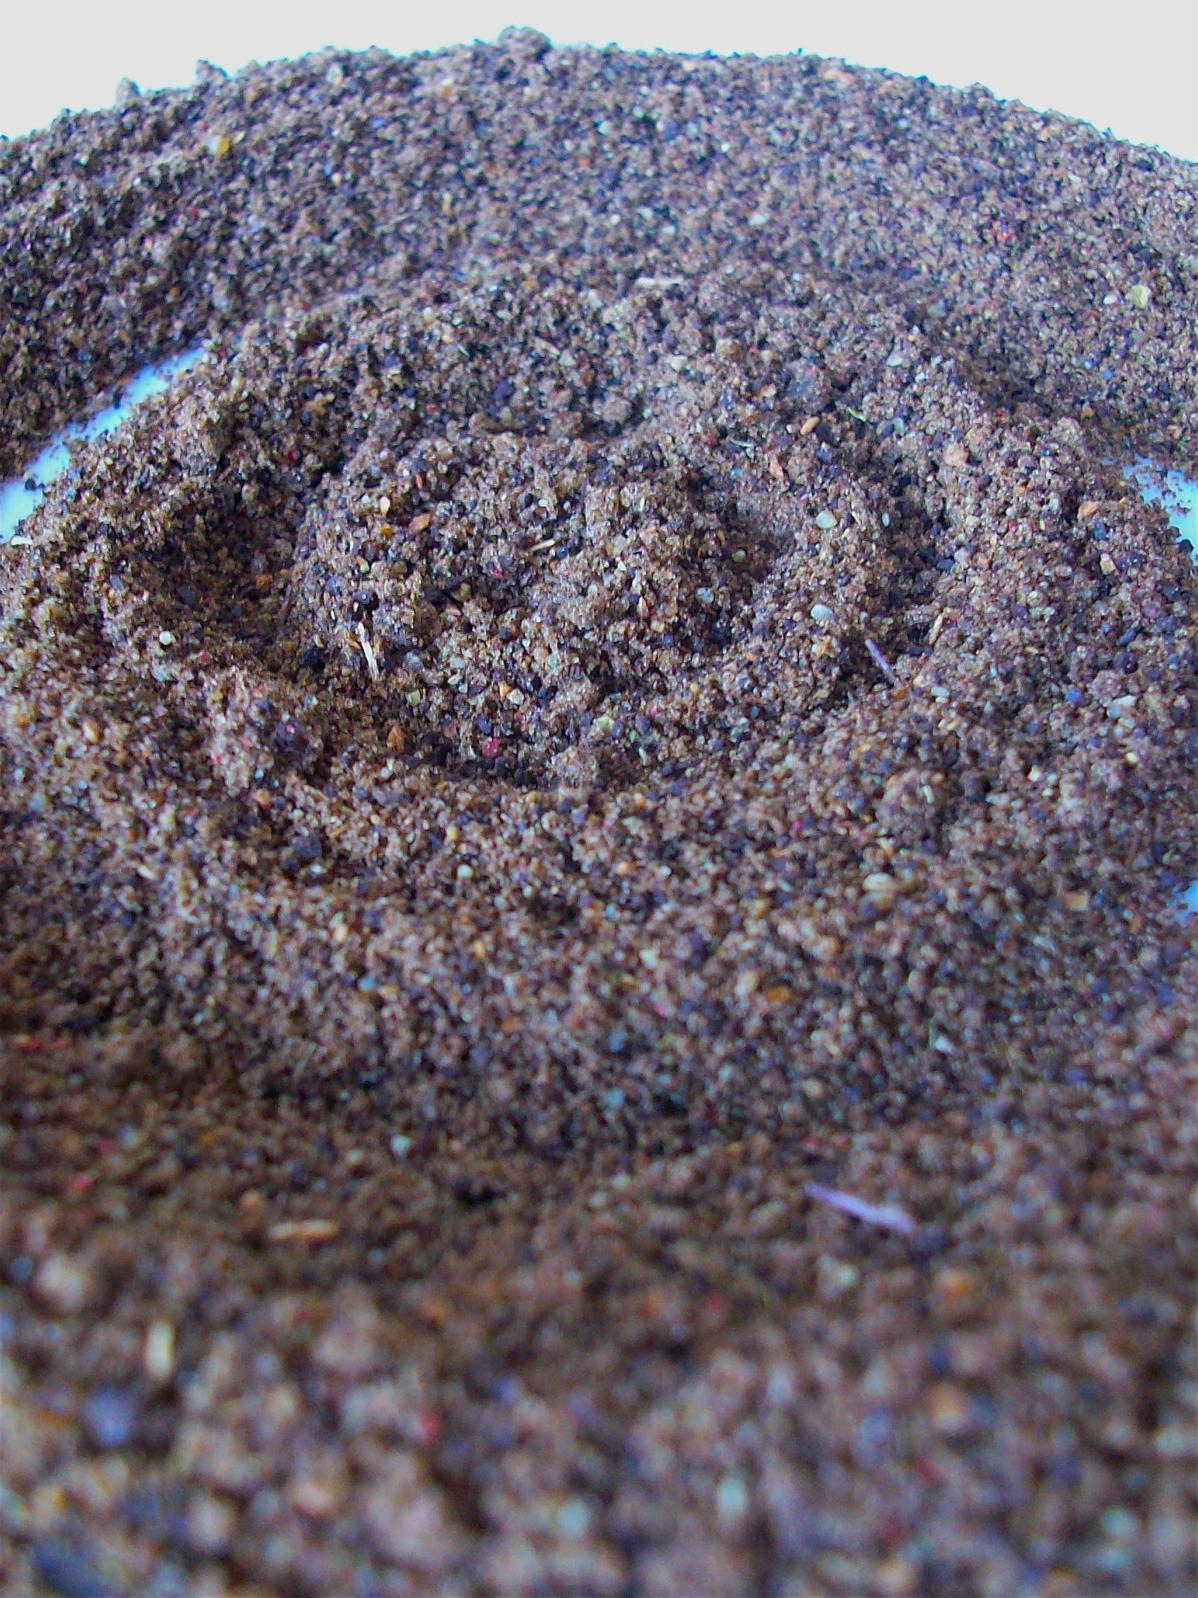  Give your meat a spicy kick with this aromatic coffee rub.